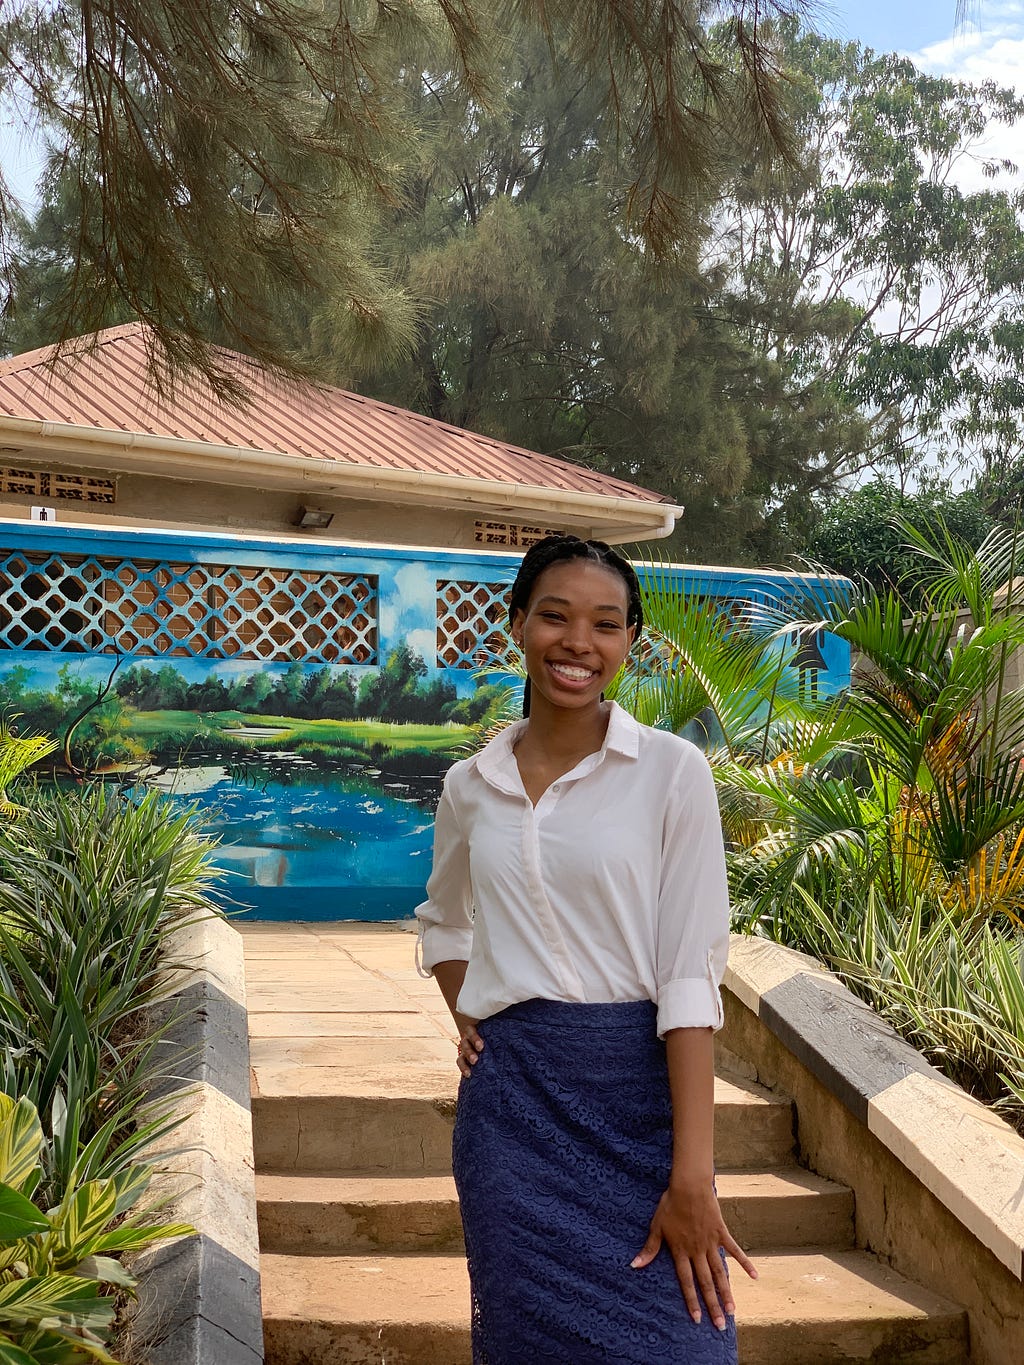 Stevie, a Black woman with her dark hair in braids pulled back, stands in a tropical setting in Uganda on a paved sidewalk in front of a couple stairs. She has one hand on her hip and the other by her side. She is wearing a cream button-up blouse and a dark blue skirt. She is looking at the camera and smiling.